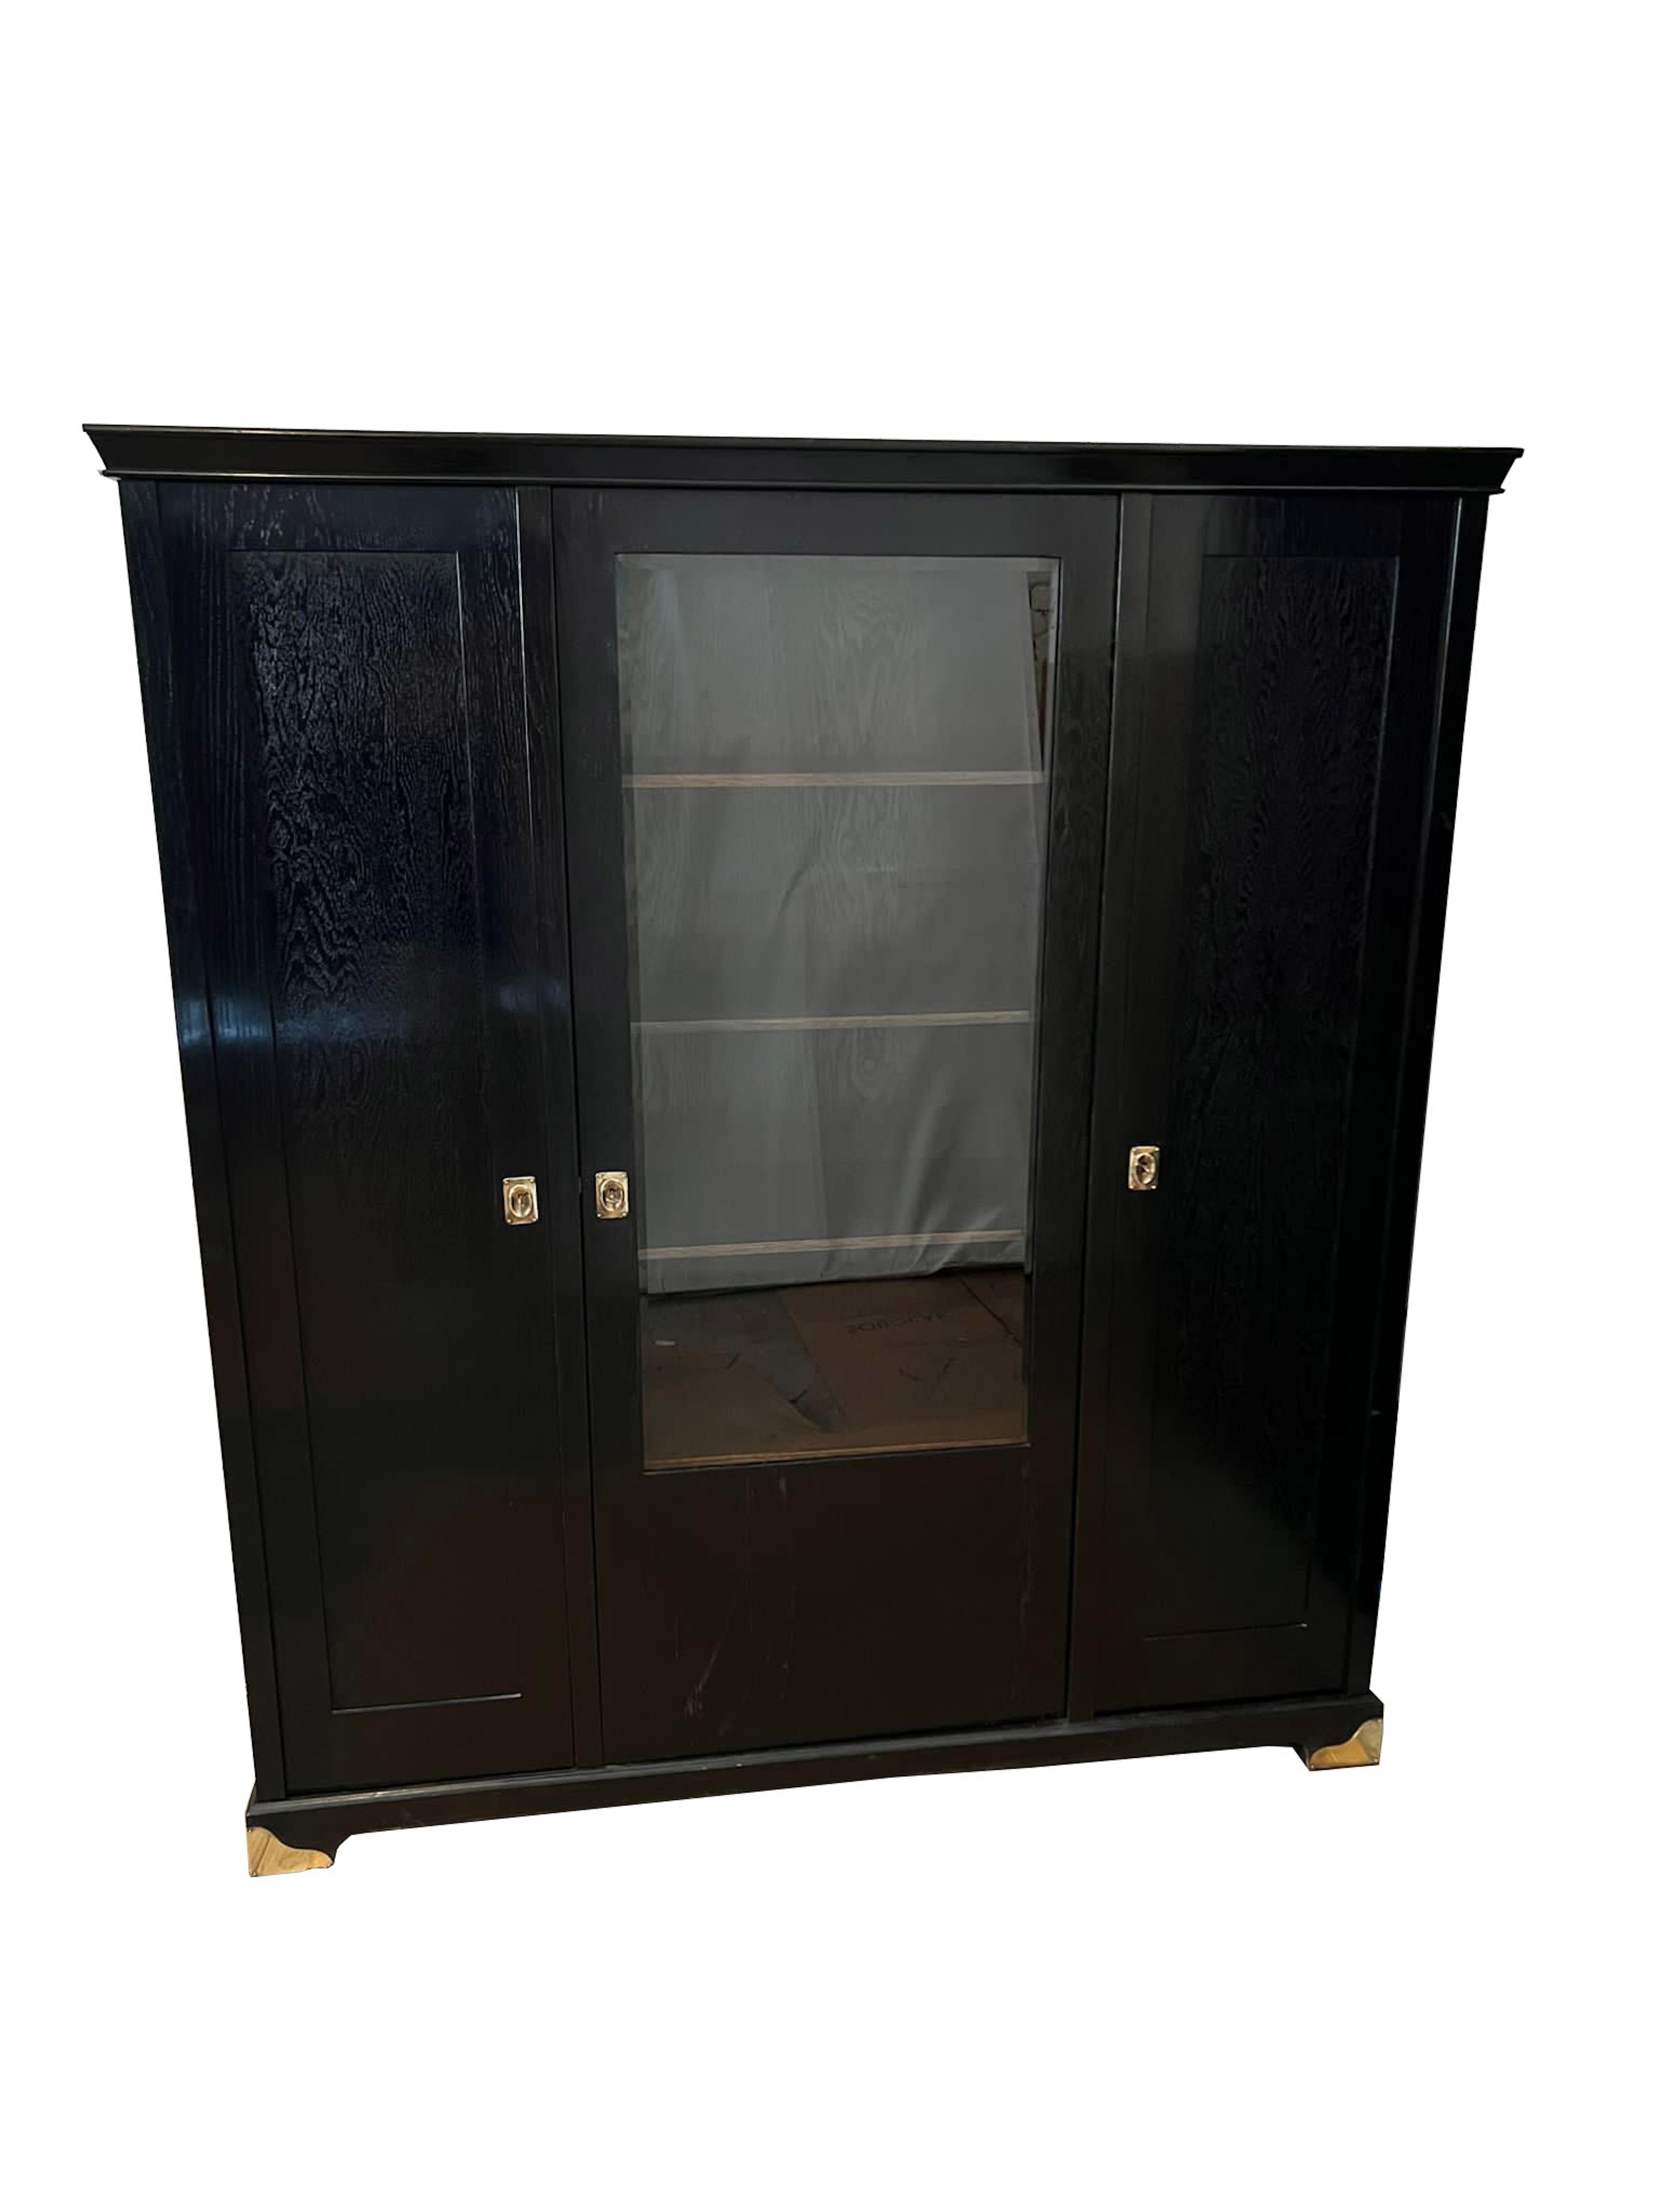 Black Art Nouveau Bookcase with Glassfront and Brassfittings (Vienna, 1910) In Good Condition For Sale In Wien, AT